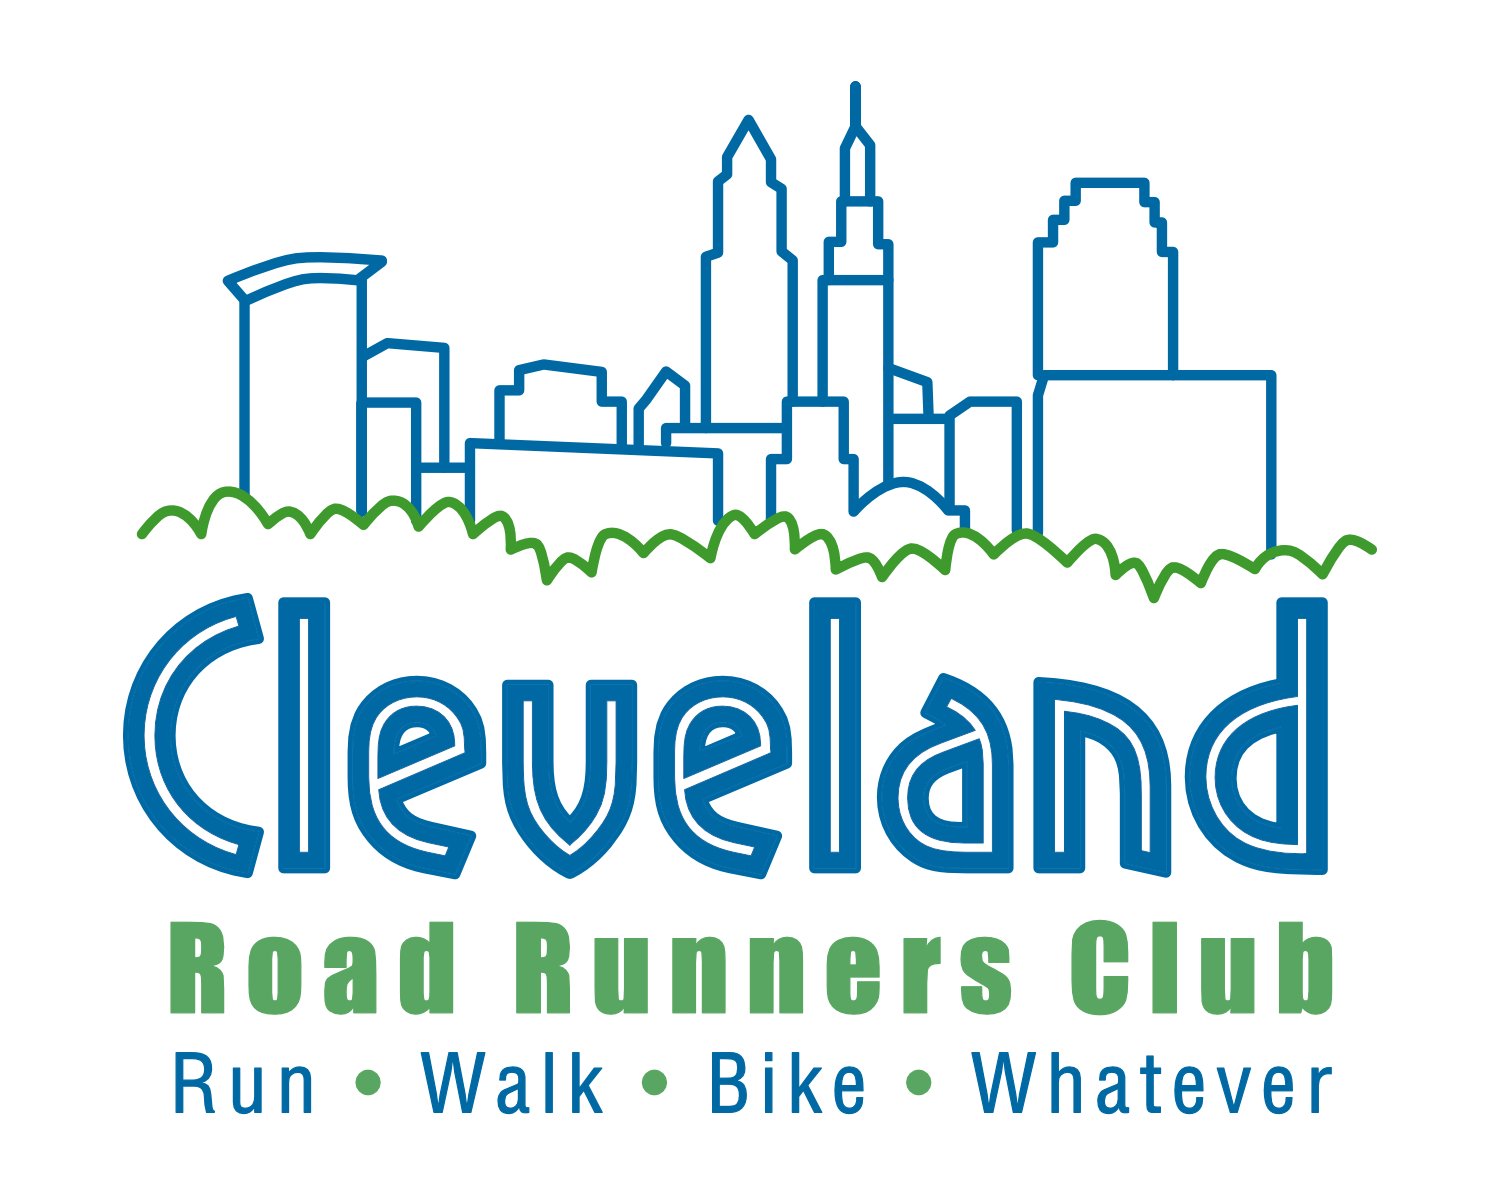 Cleveland Road Runners Club